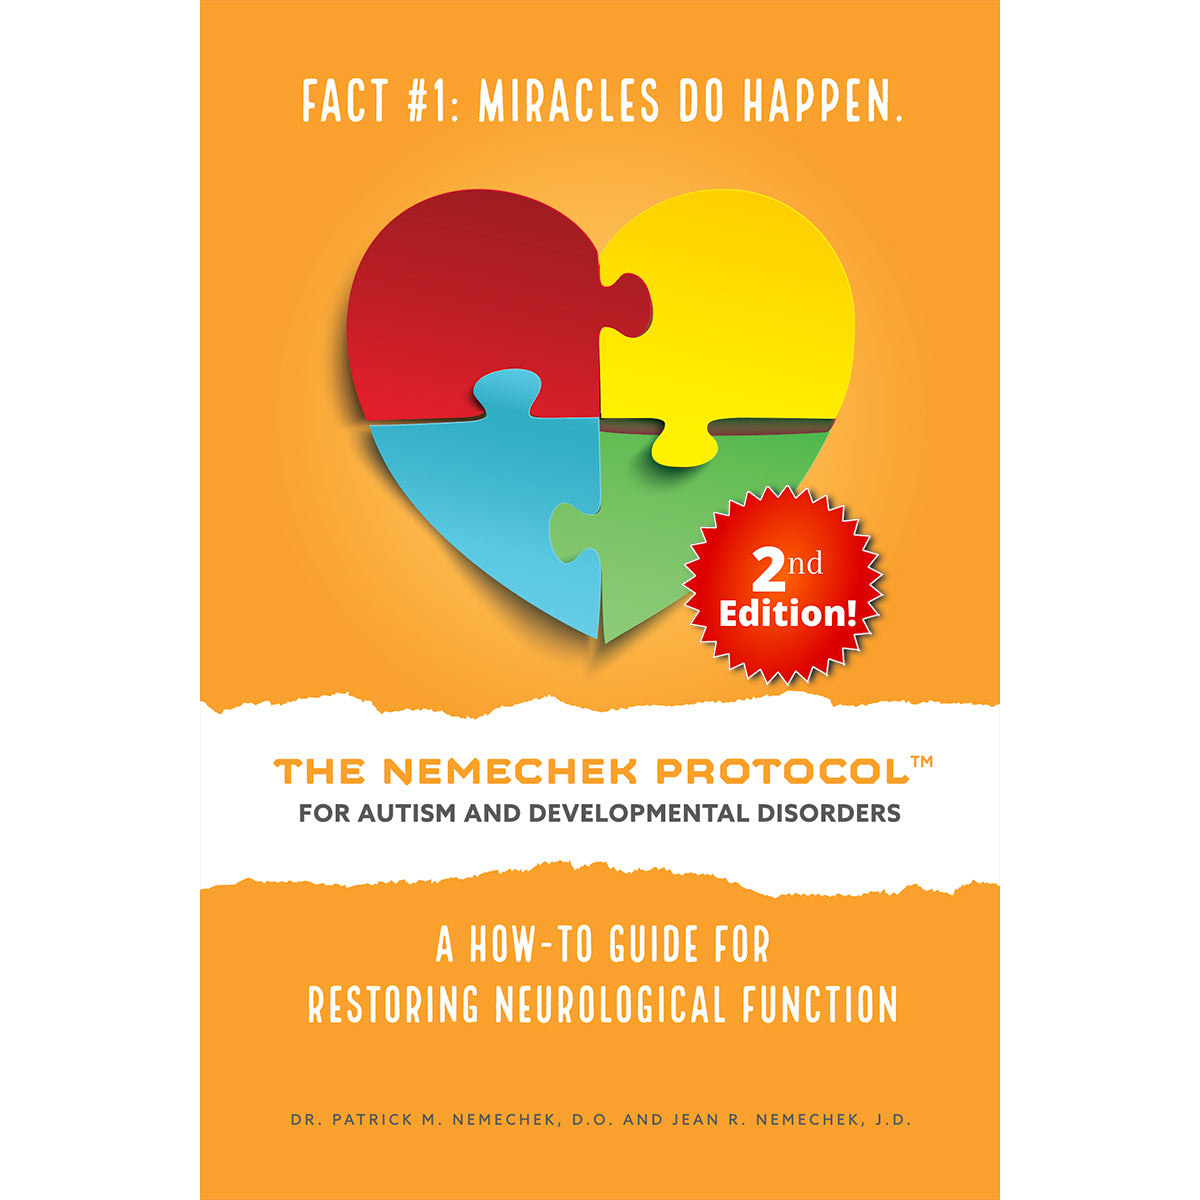 2nd Ed., The Nemechek Protocol for Autism and Developmental Disorders